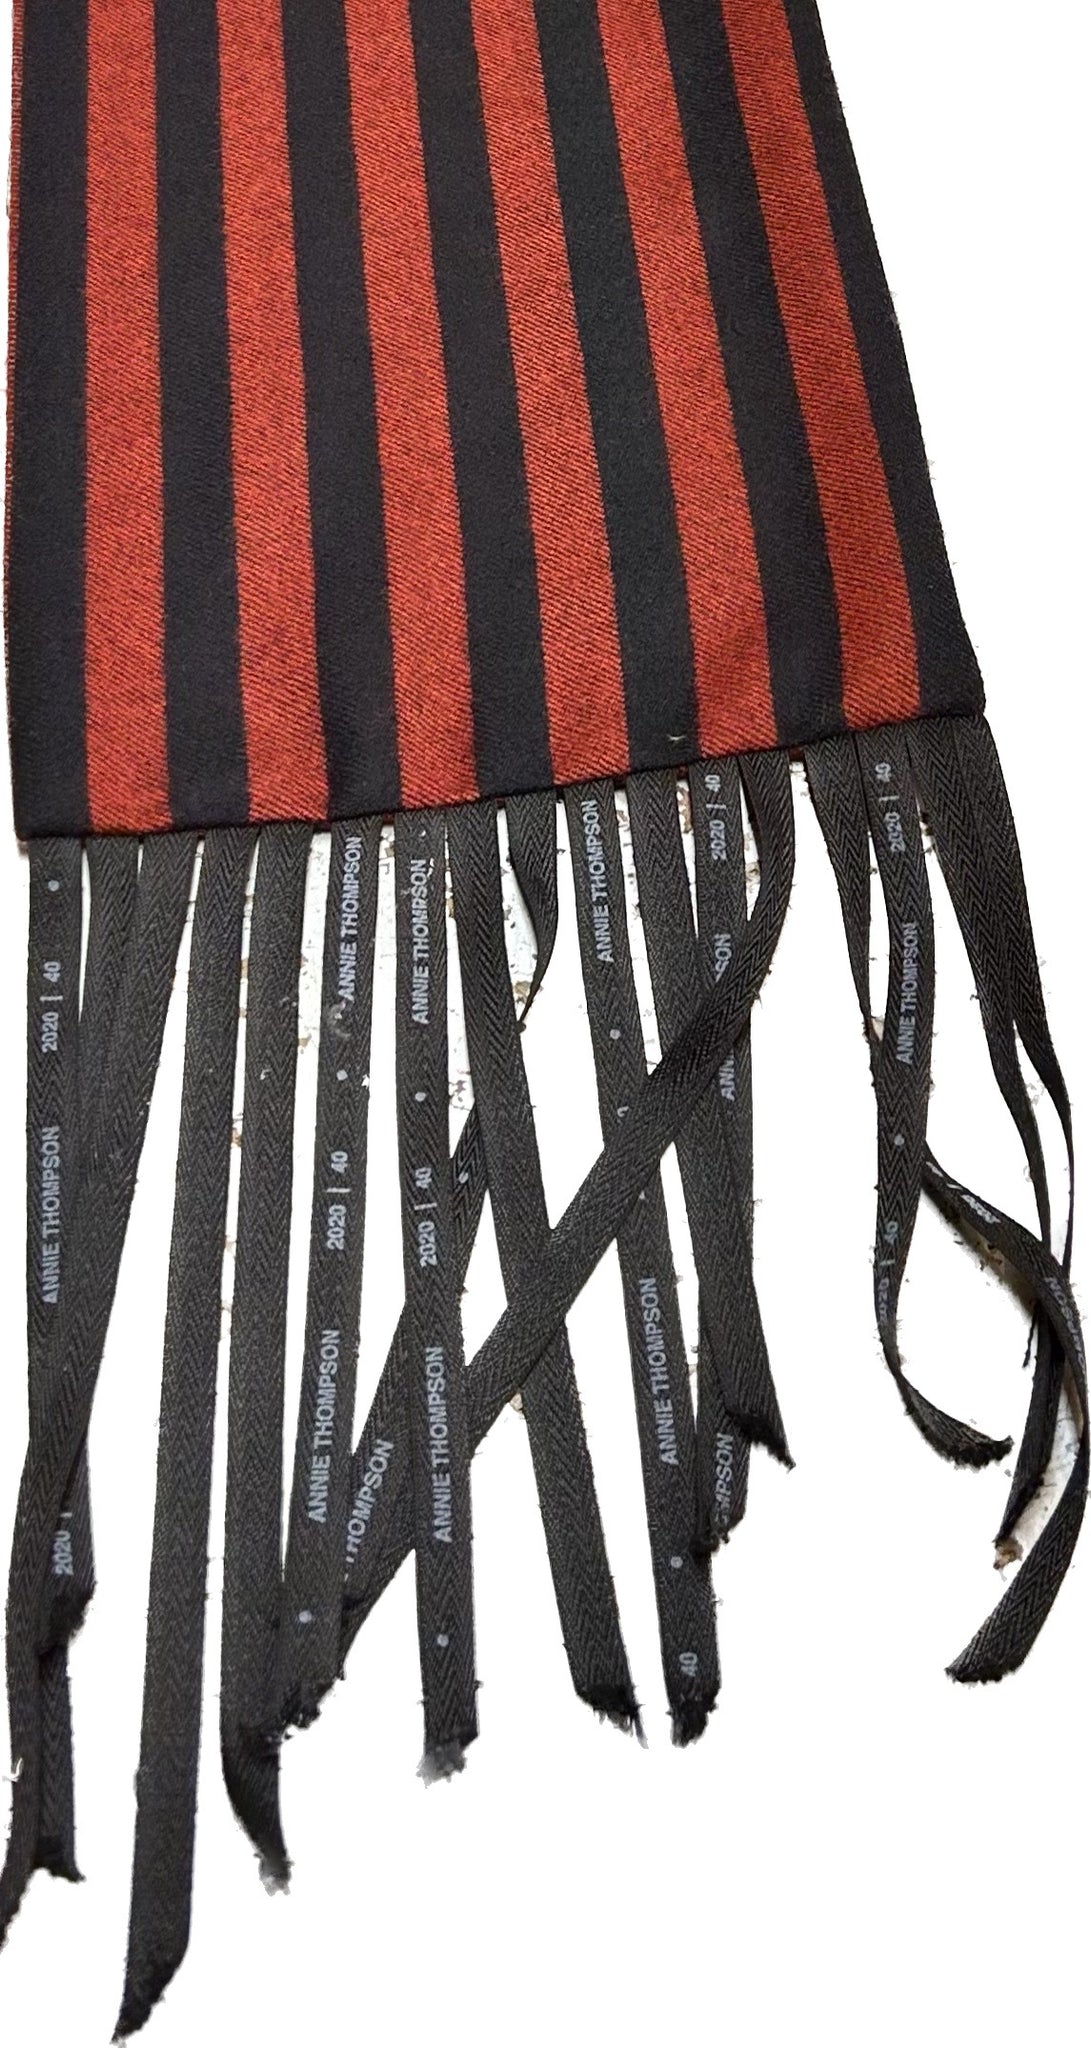 The Ritchie scarf